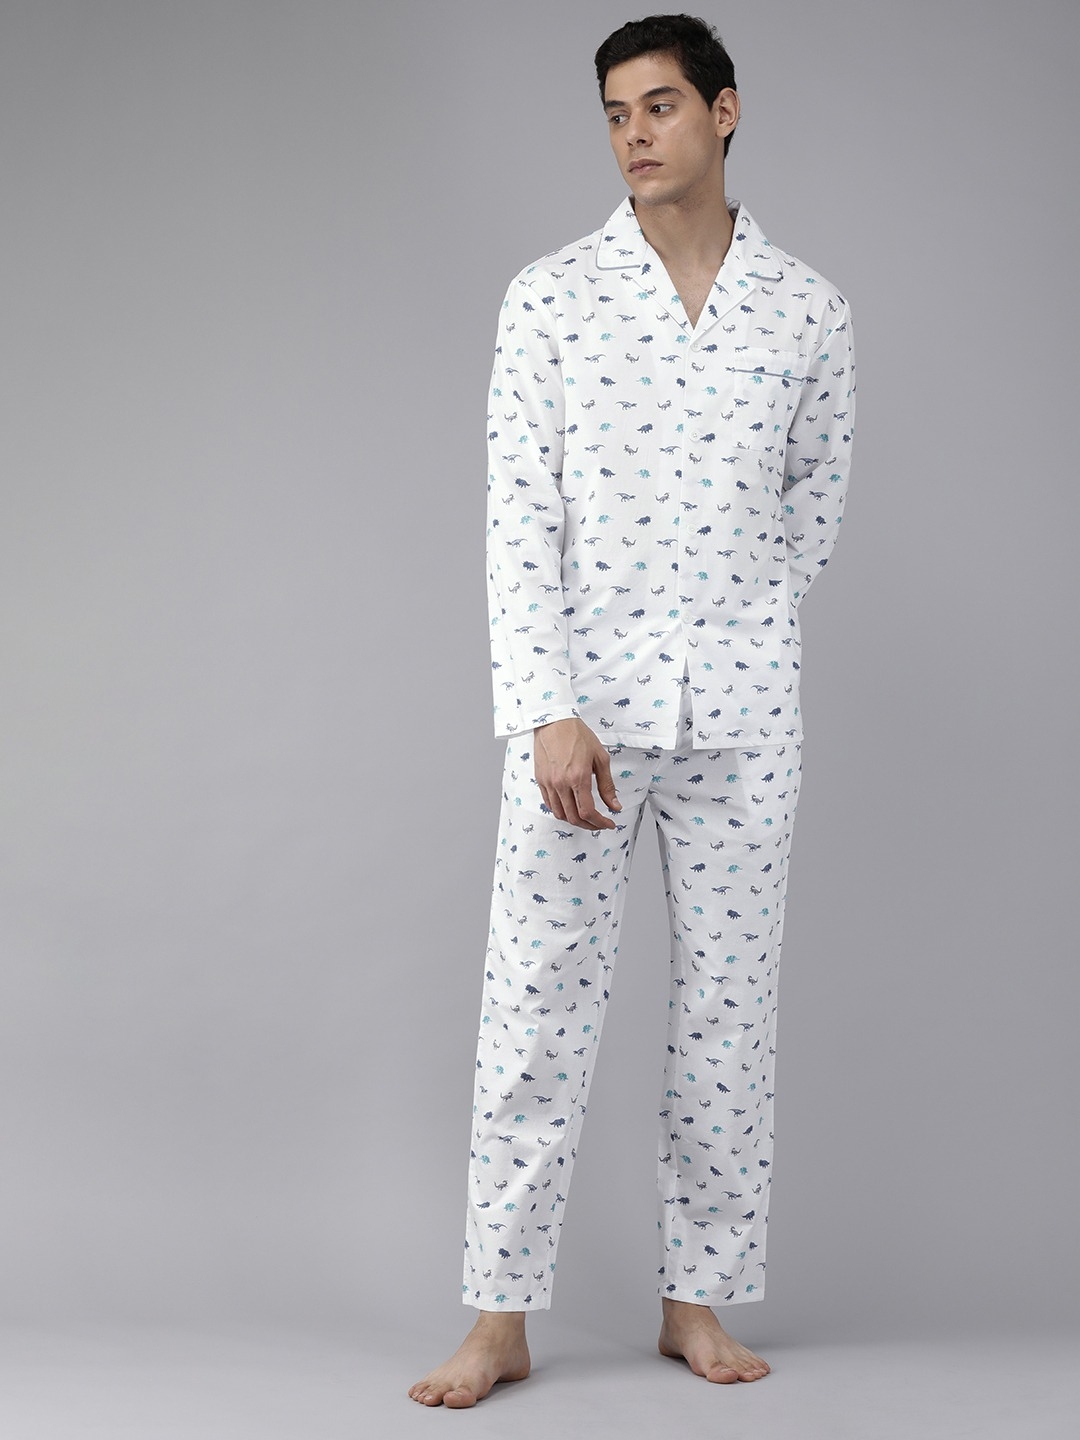 The Bear House | Men's Printed Night-Suit